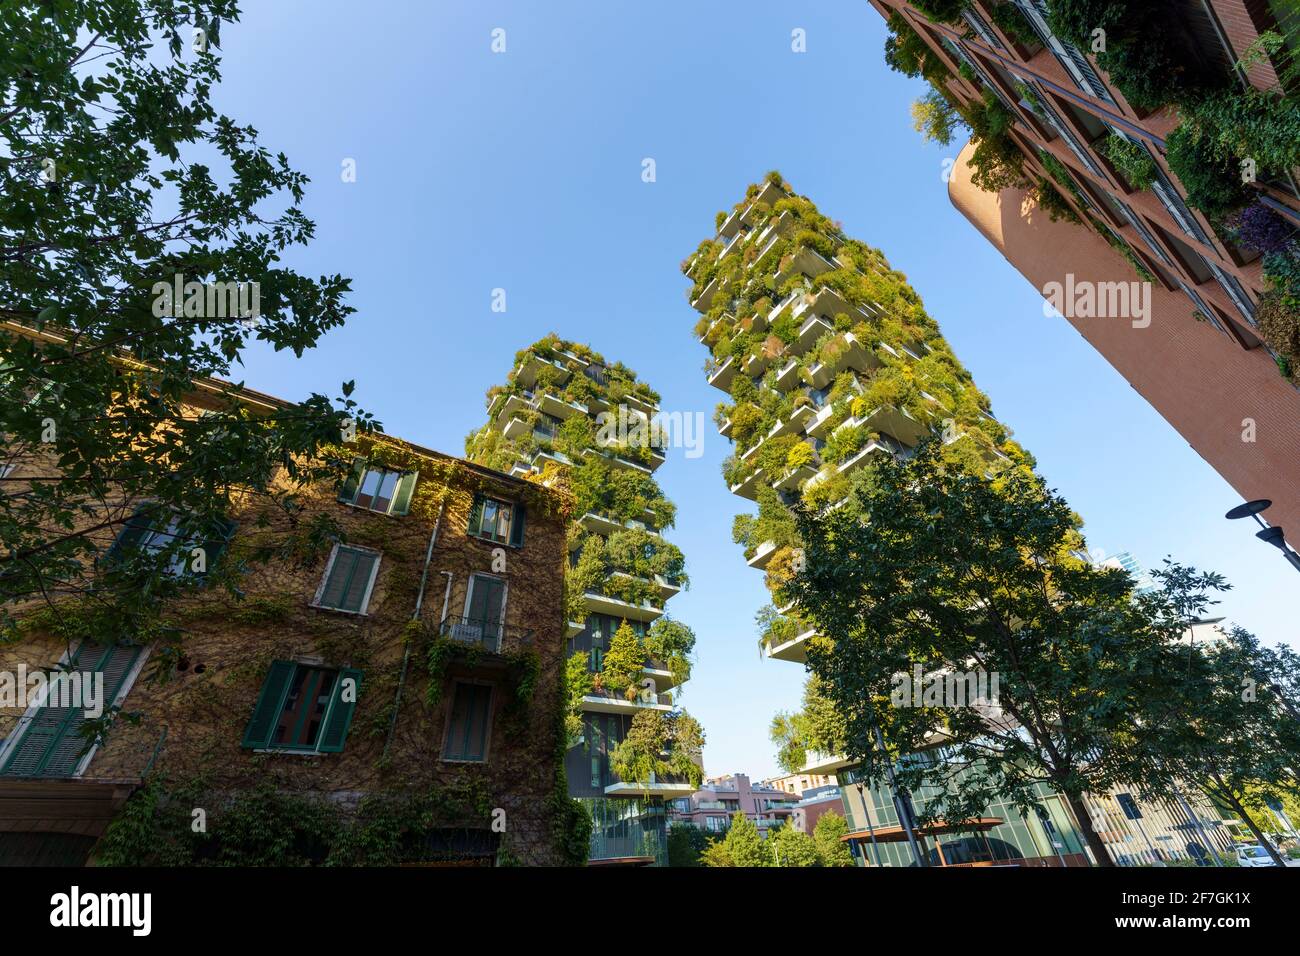 Milan, Lombardy, Italy: modern residential buildings known as Bosco Verticale, with balconies, plants and trees Stock Photo